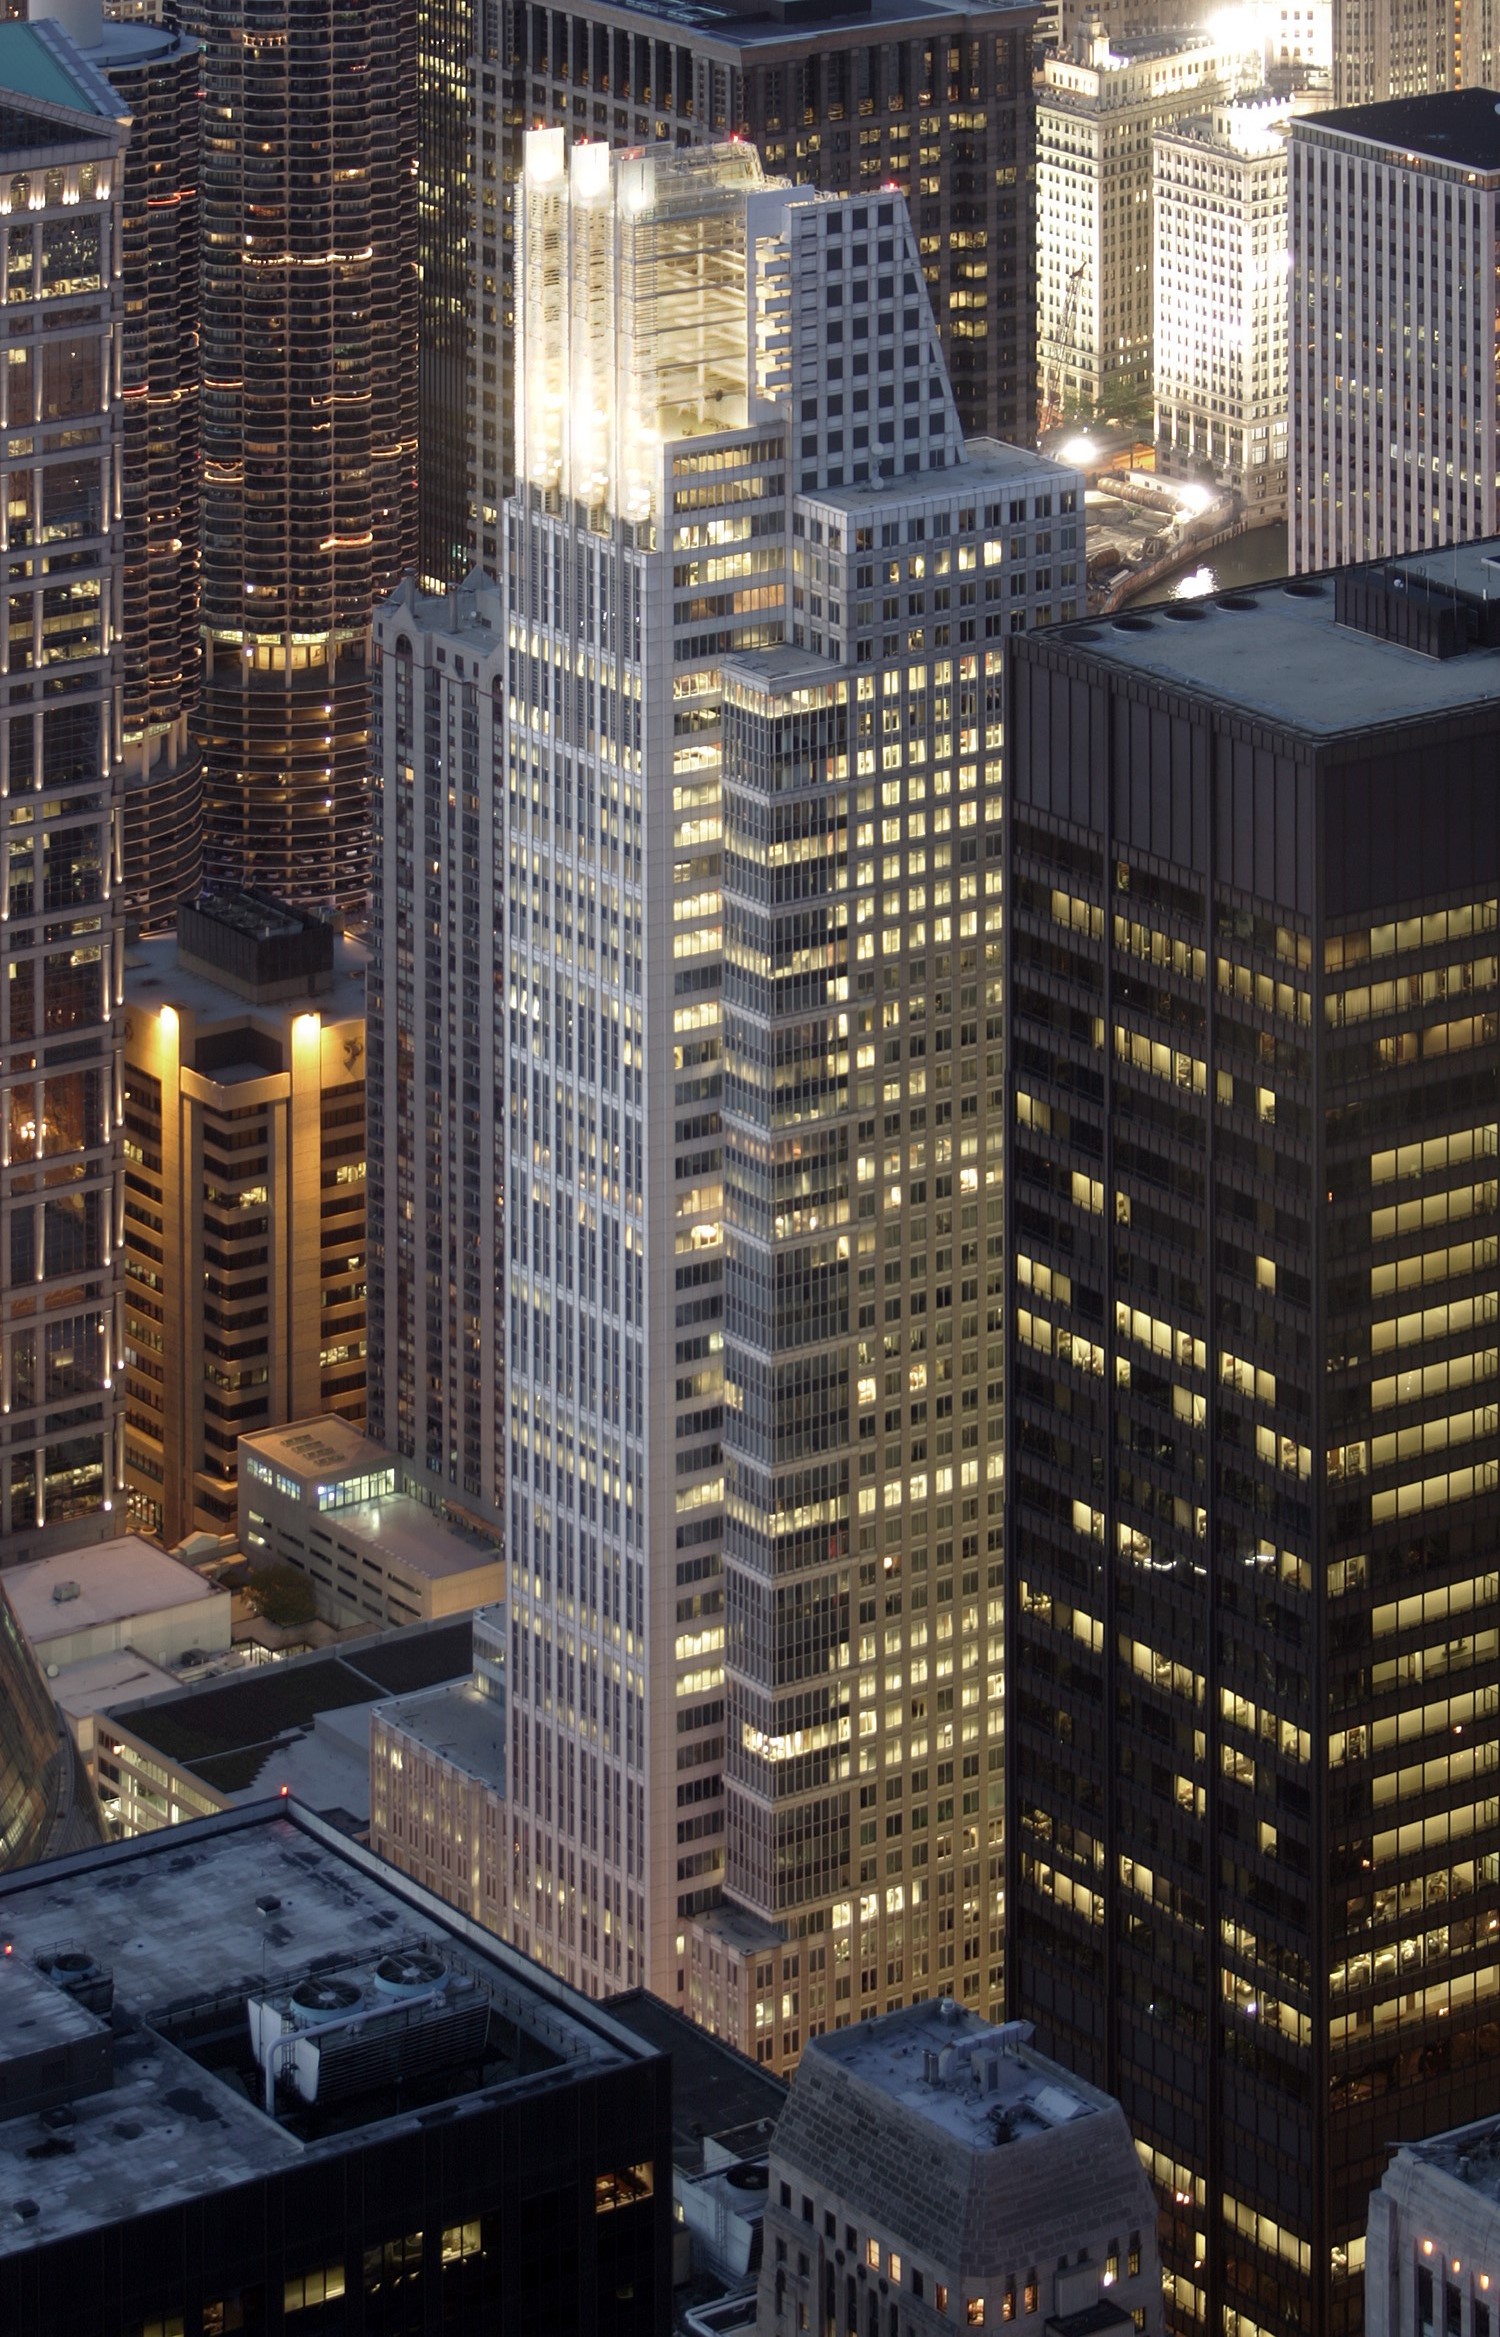 Grant Thornton Tower, Chicago - Night view from Sears Tower. © Mathias Beinling